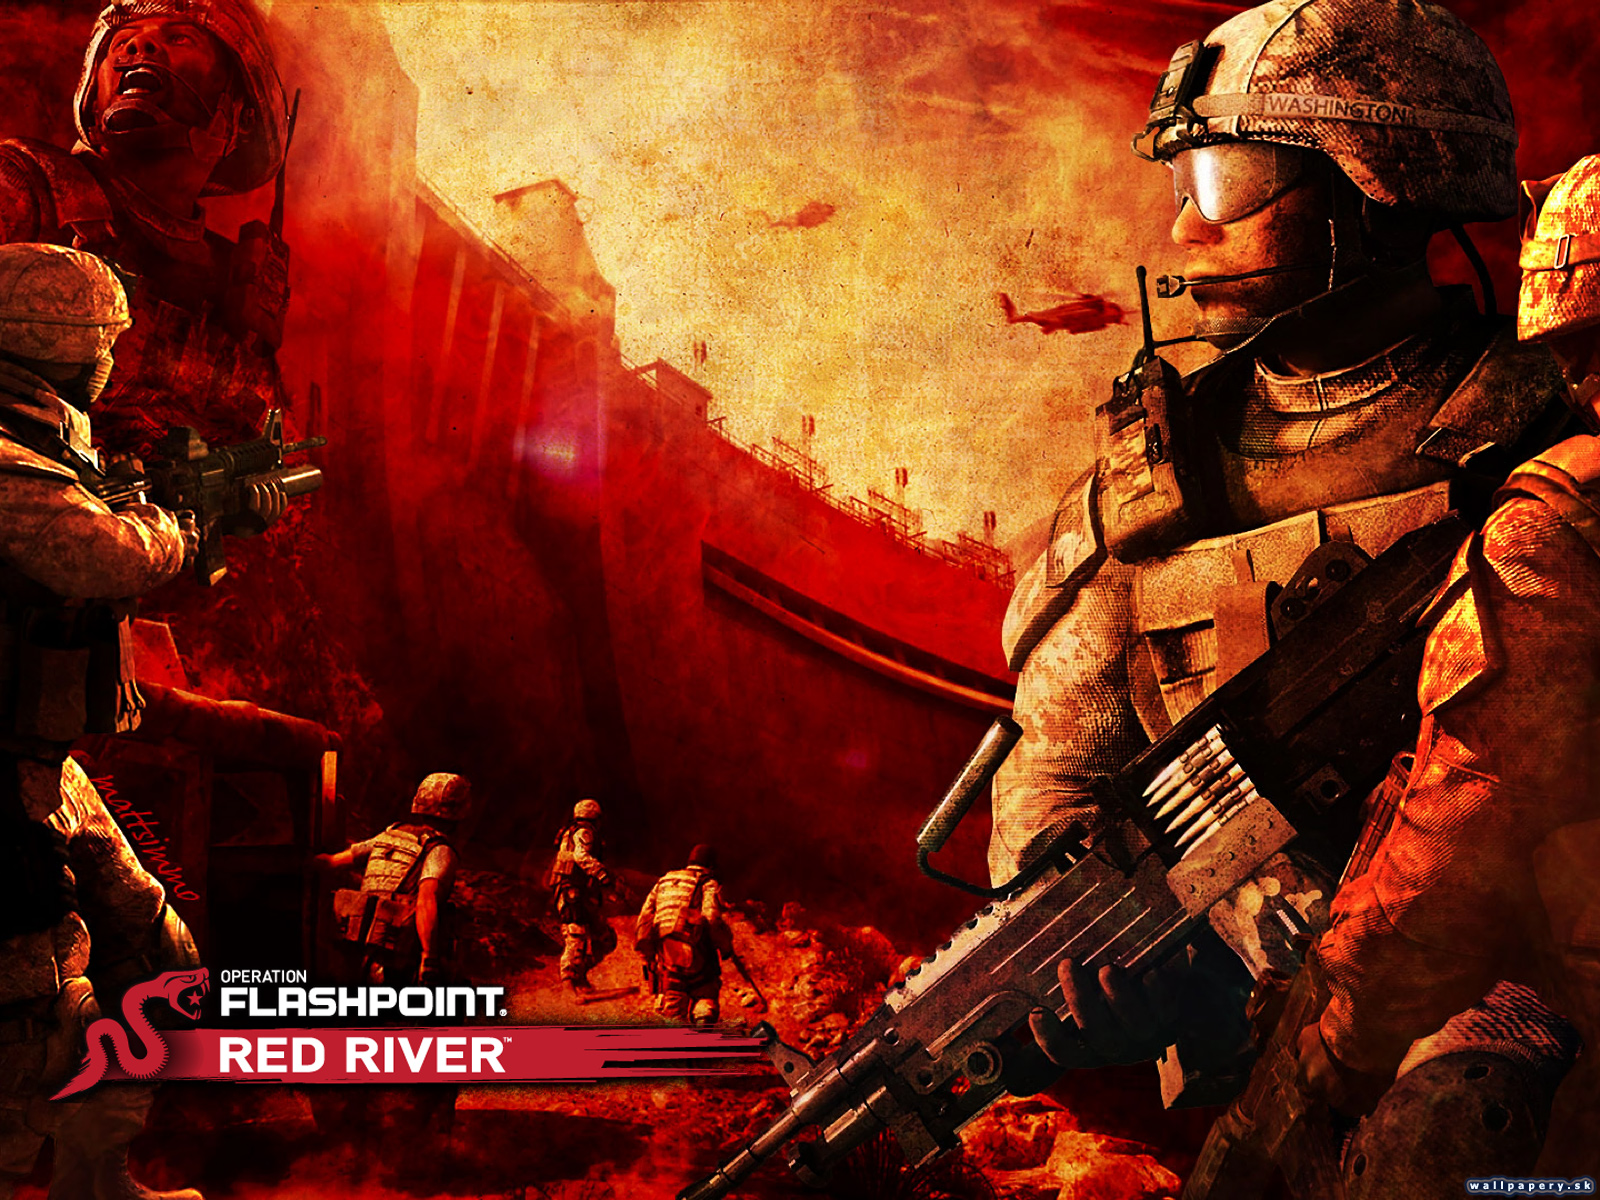 Operation Flashpoint: Red River - wallpaper 1